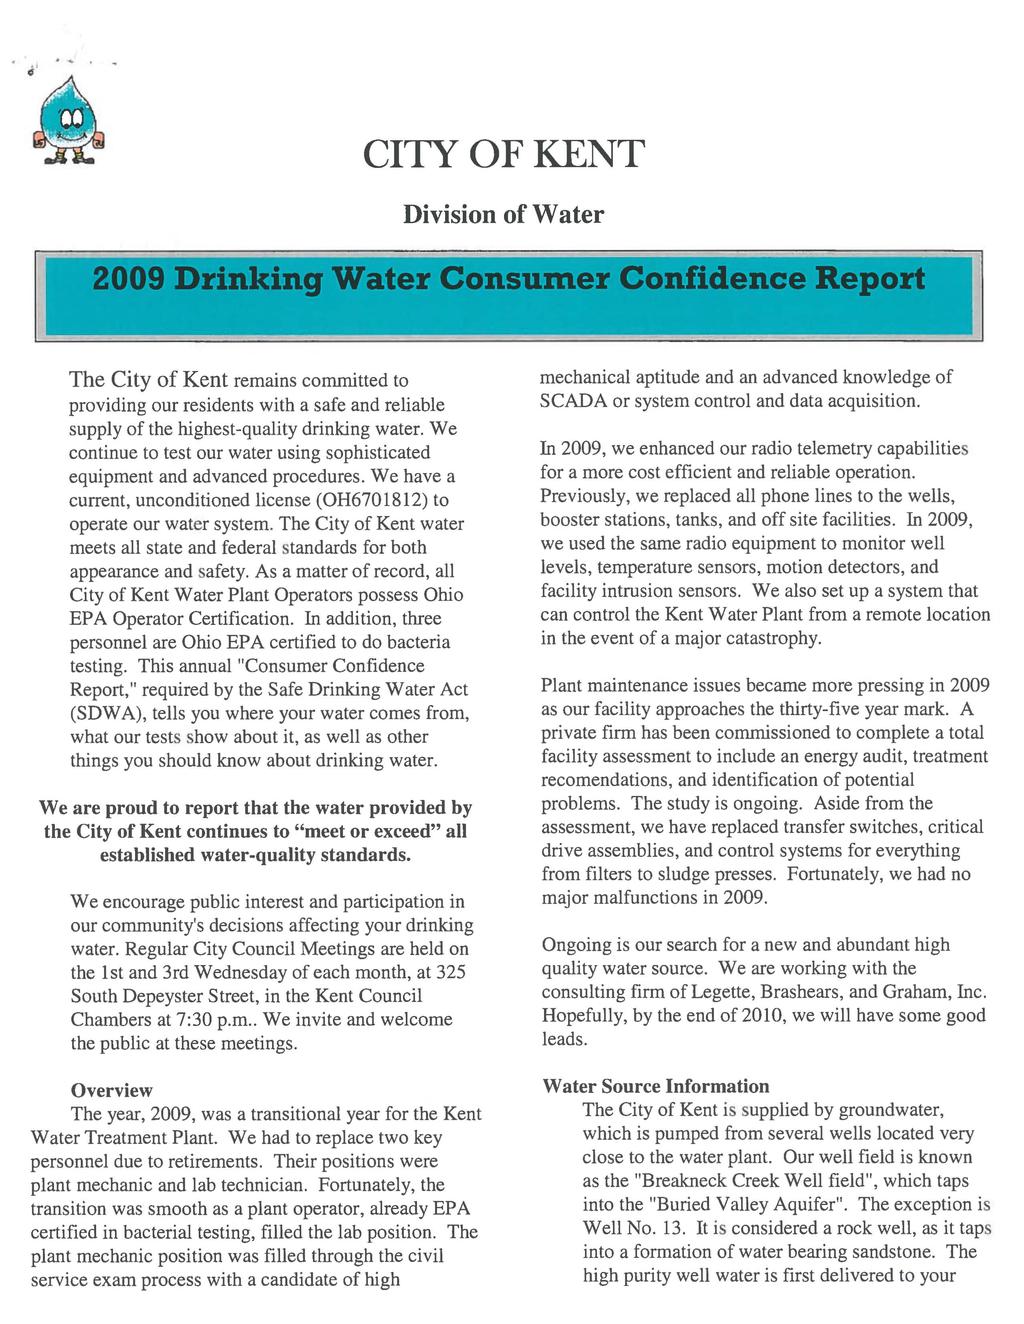 CITY OF KENT Division of Water The City of Kent remains committed to providing our residents with a safe and reliable supply of the highest-quality drinking water.